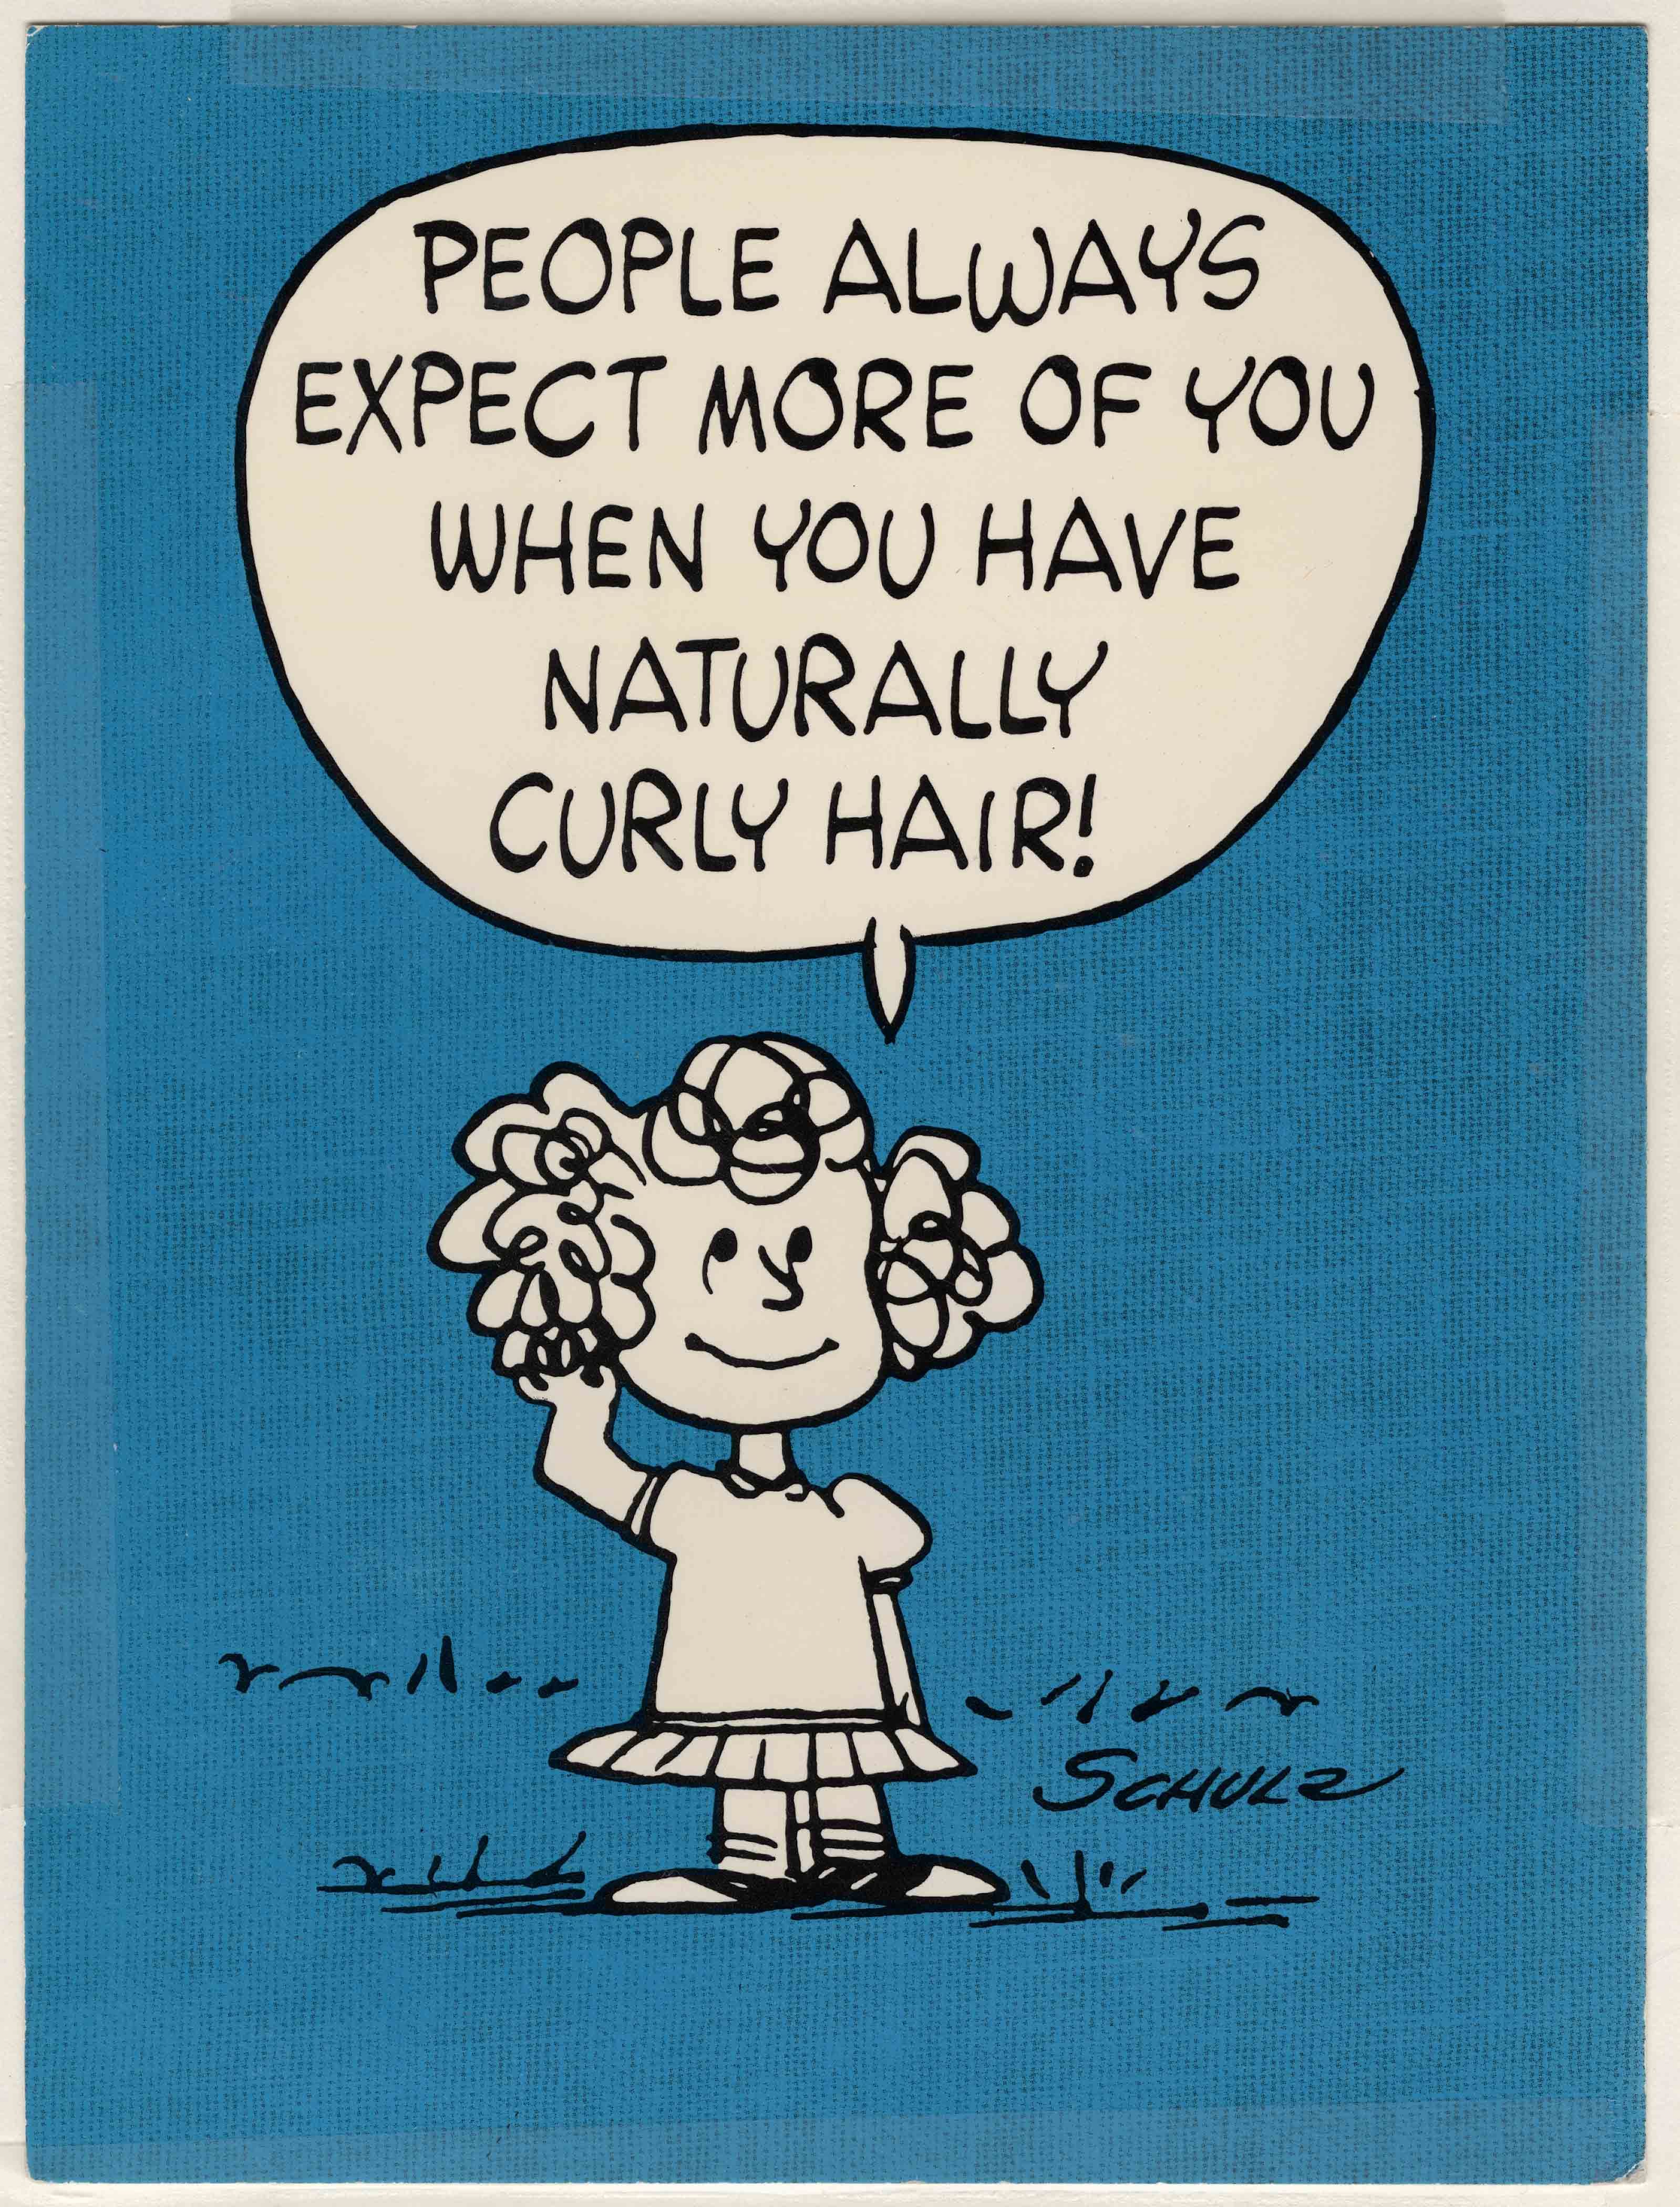 People always expect more of you when you have naturally curly hair!